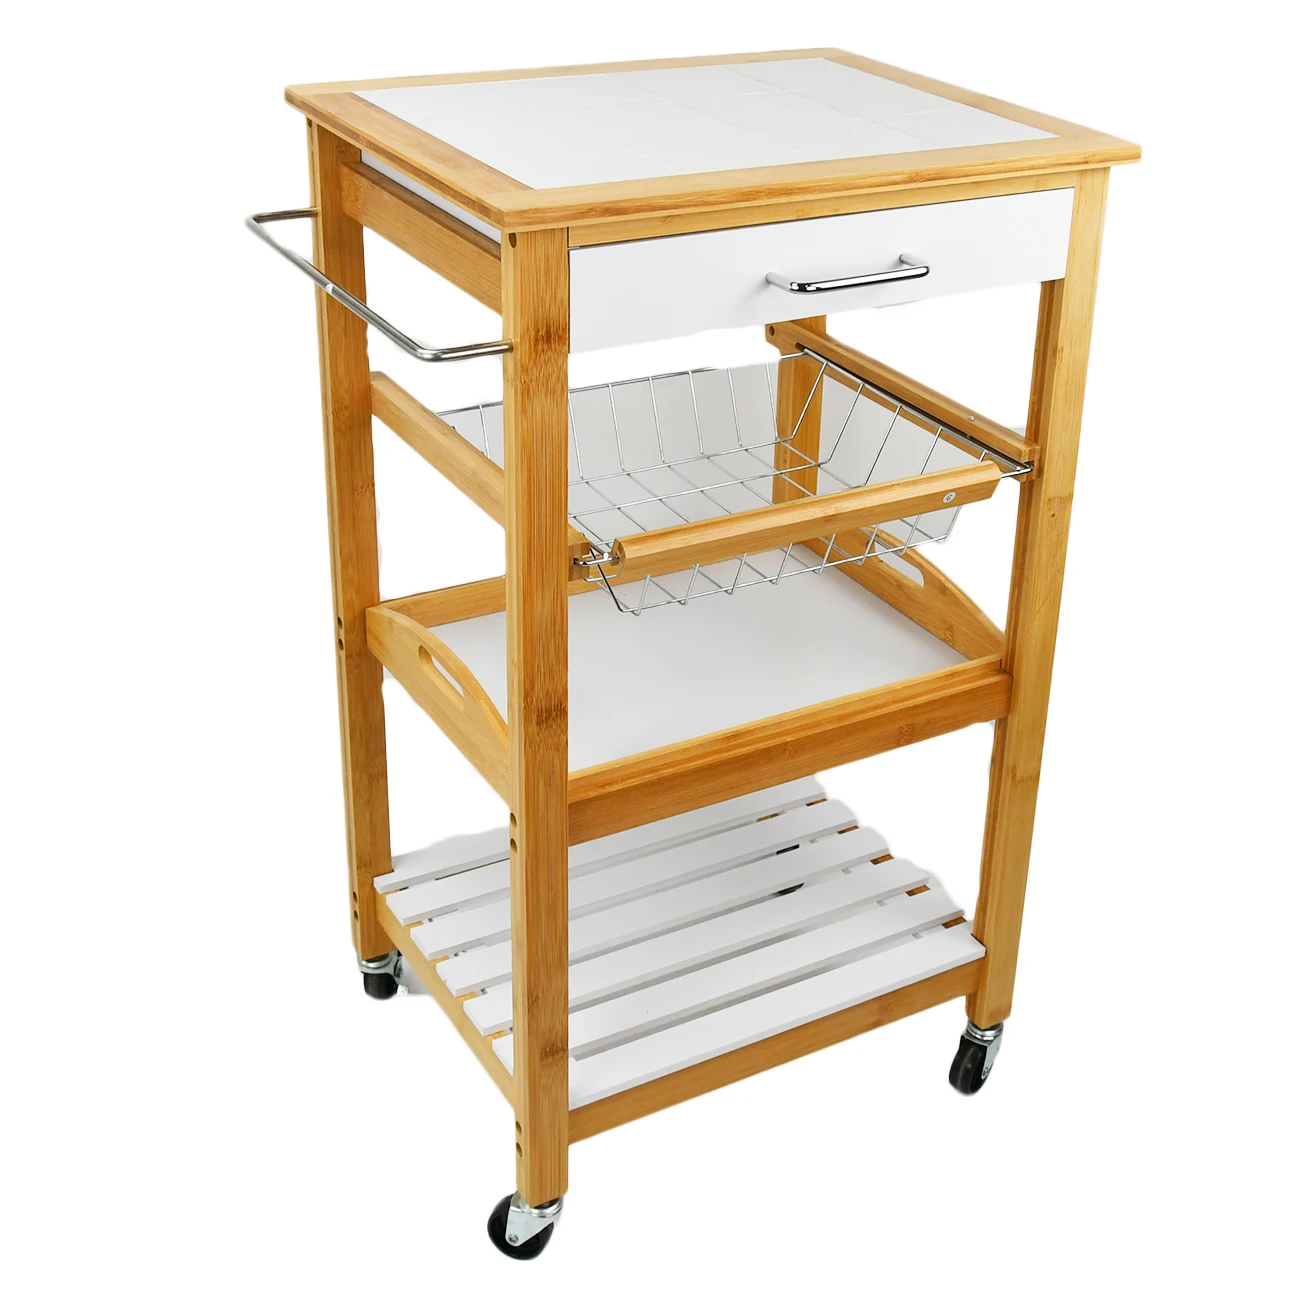 Bamboo Rolling 3 tiers shelf Kitchen Trolley Cart with Wire Storage Baskets Drawer